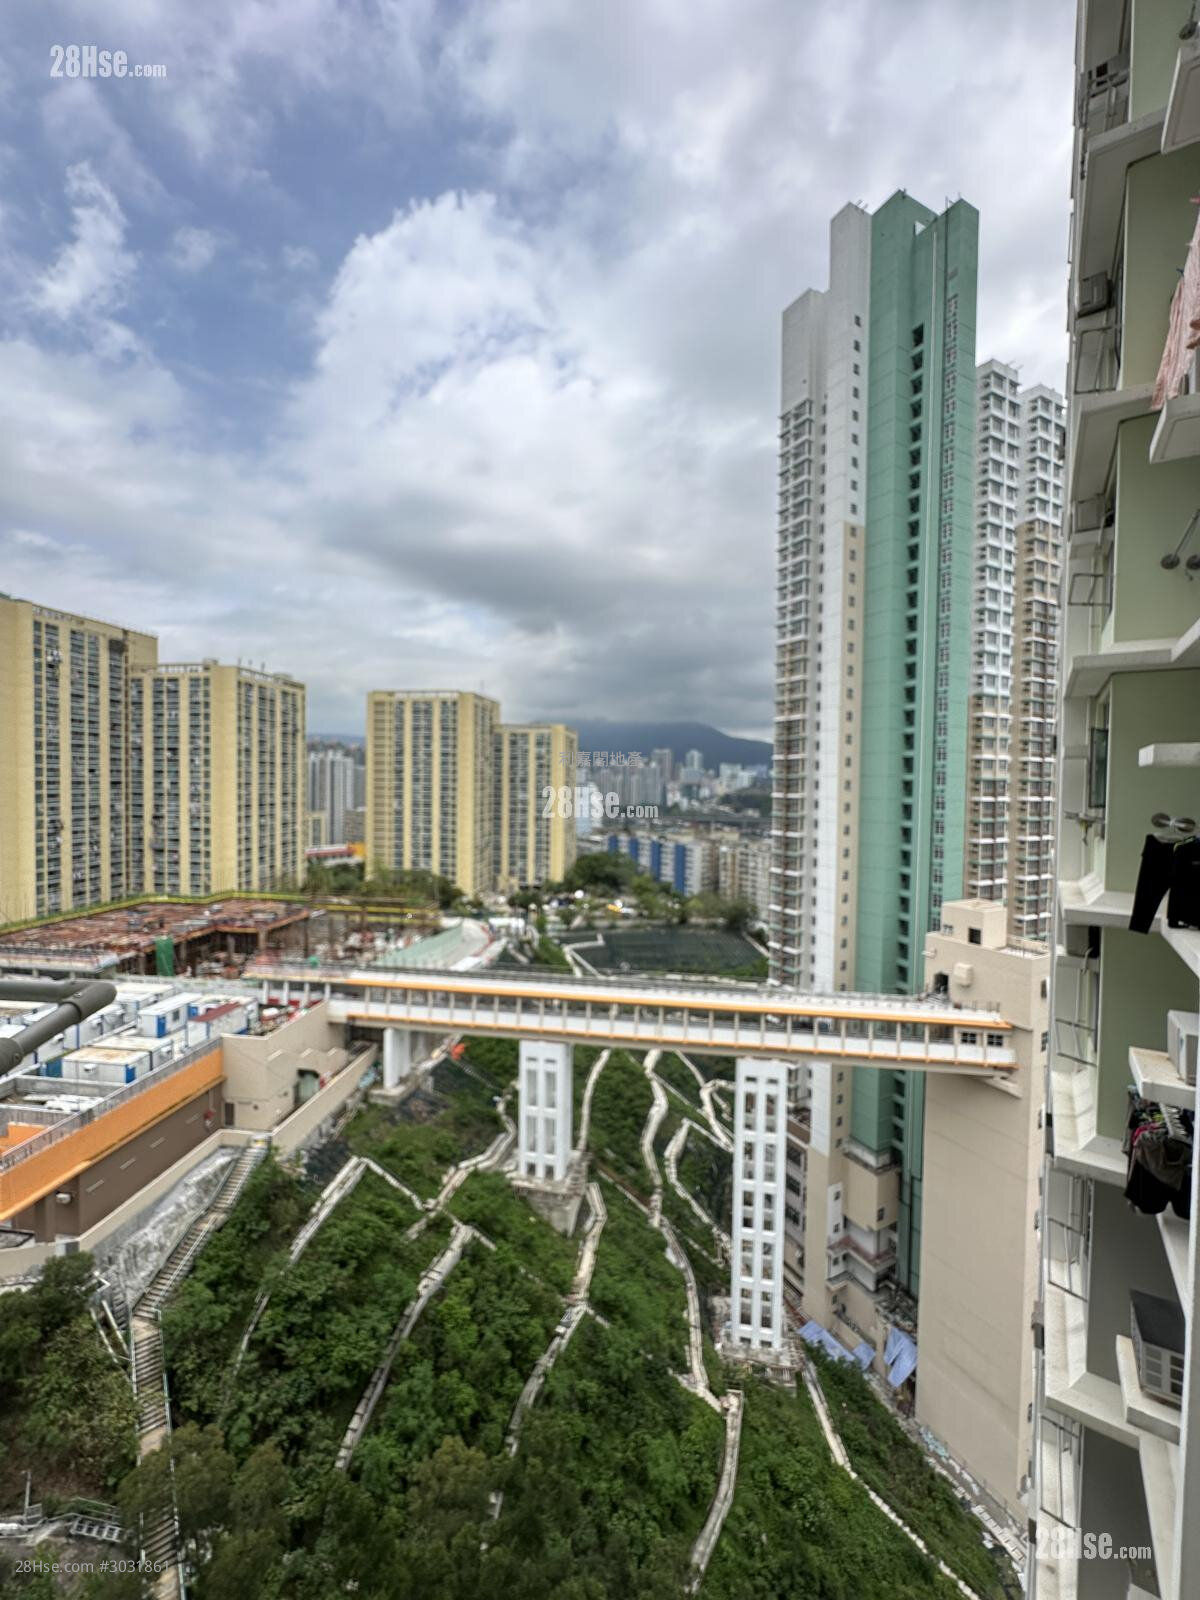 Ching Chun Court Sell 2 bedrooms 438 ft²